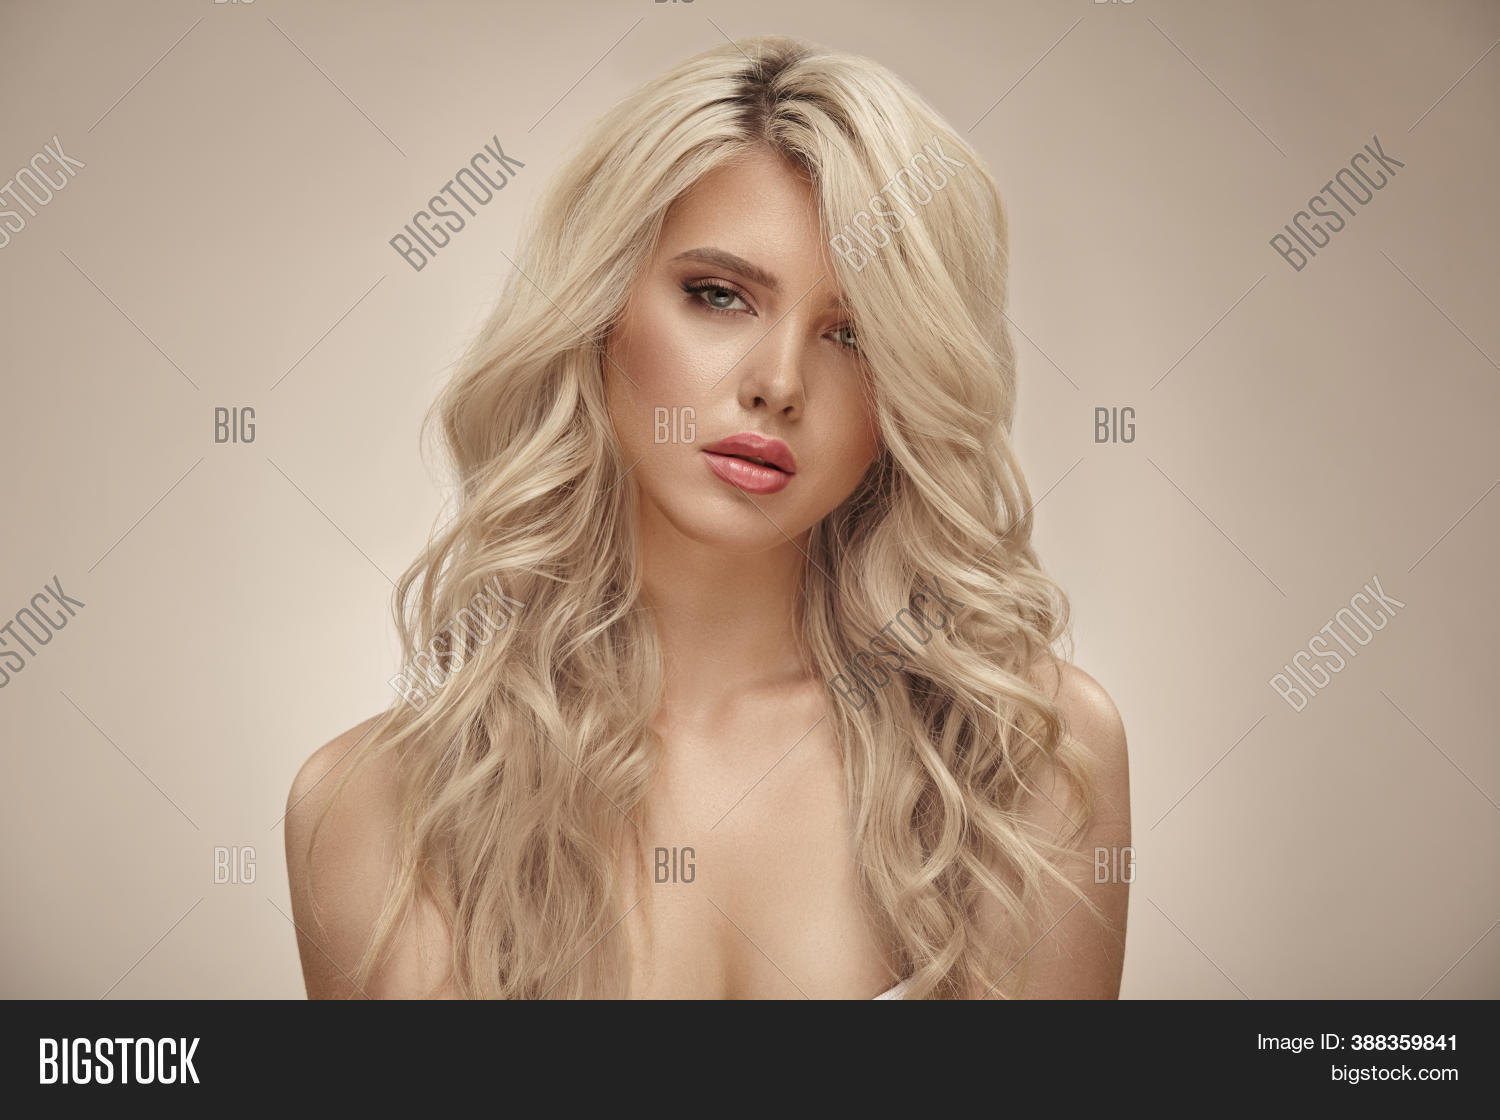 alan dionisio recommends beautiful nude blondes pic